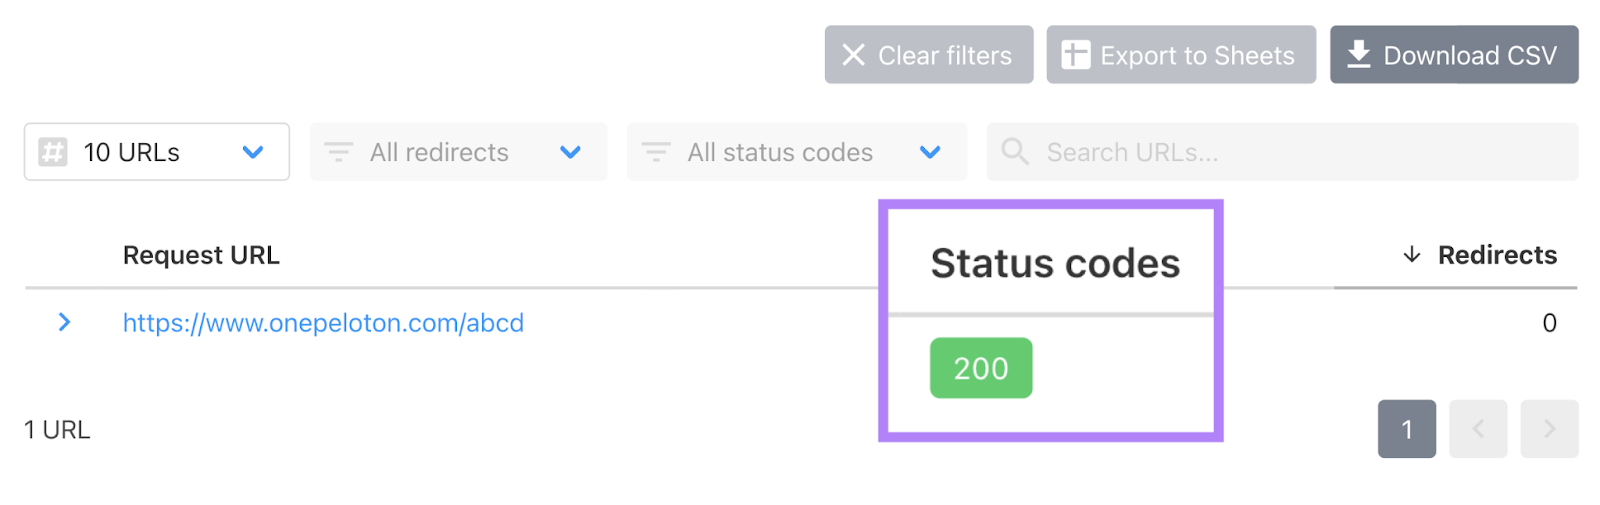 httpstatus.io showing "200" status code for “https://www.onepeloton.com/abcd” URL